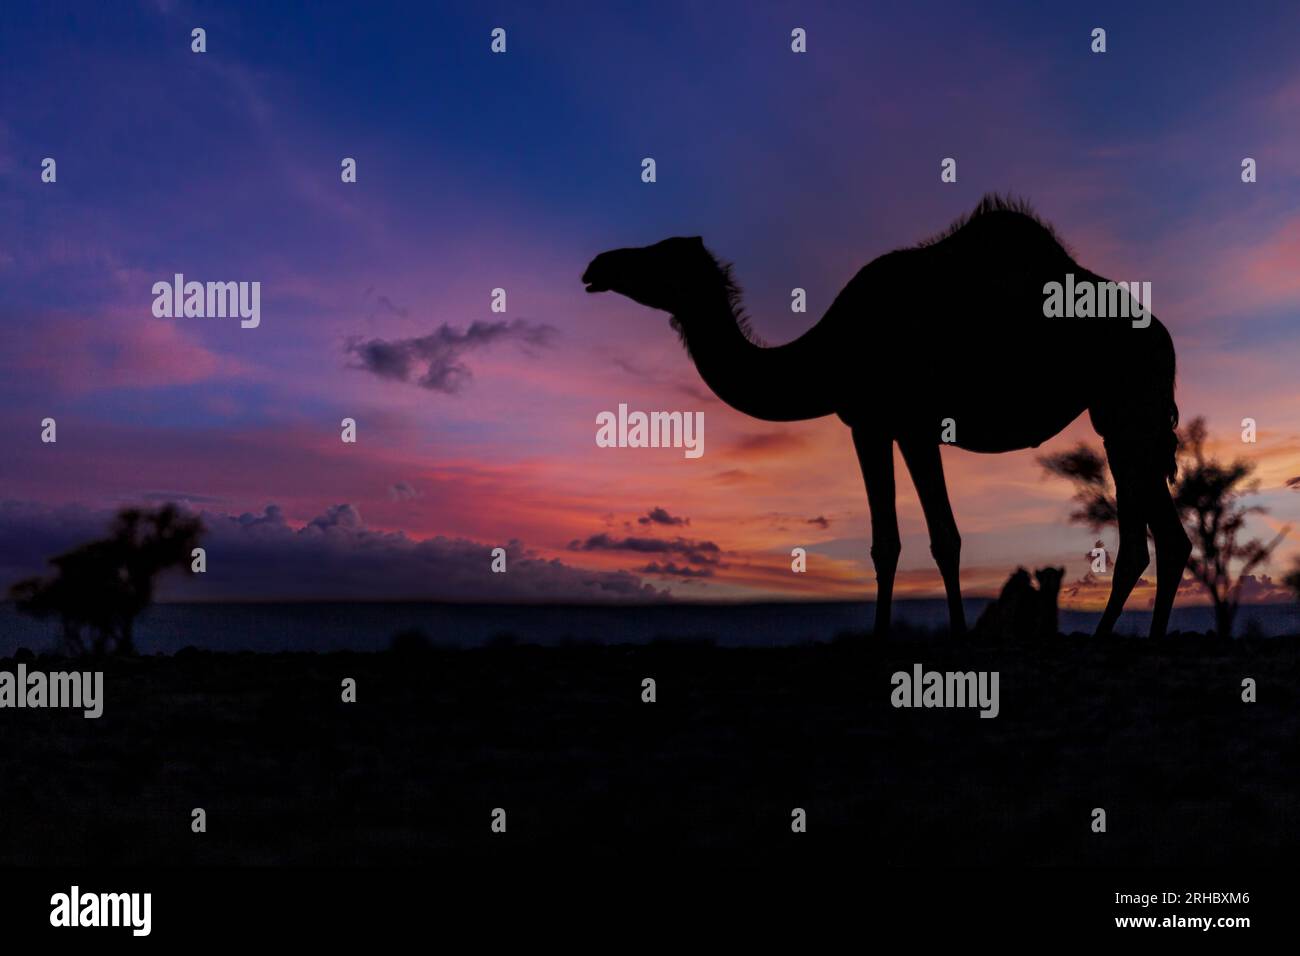 Silhouette of a Camel in the desert at sunset, Saudi Arabia Stock Photo